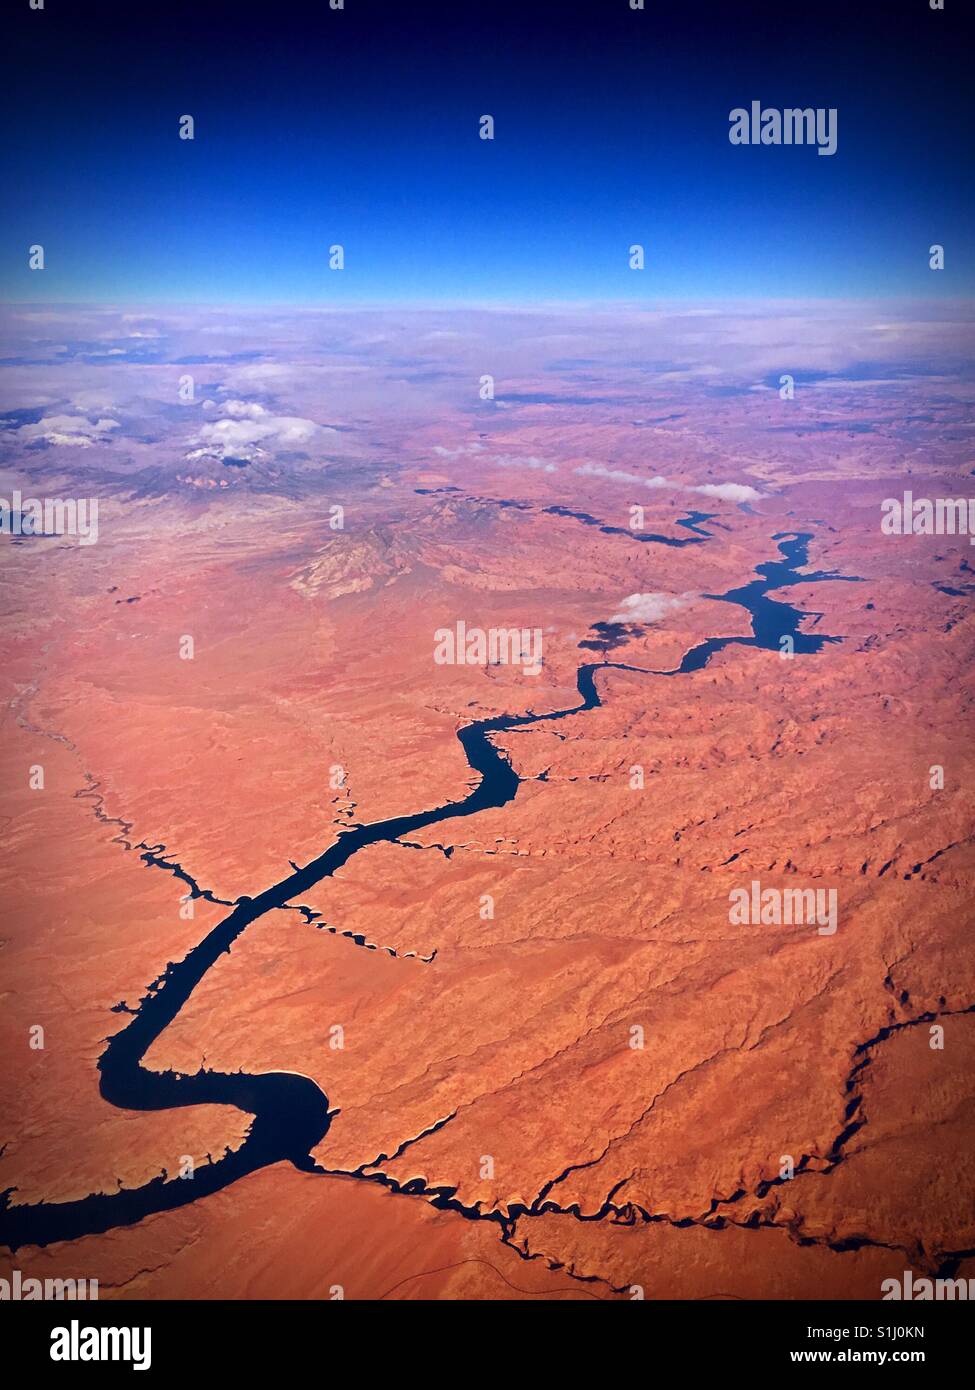 A Meandering River In The Desert Landscape From A Birds Eye View Stock Photo Alamy